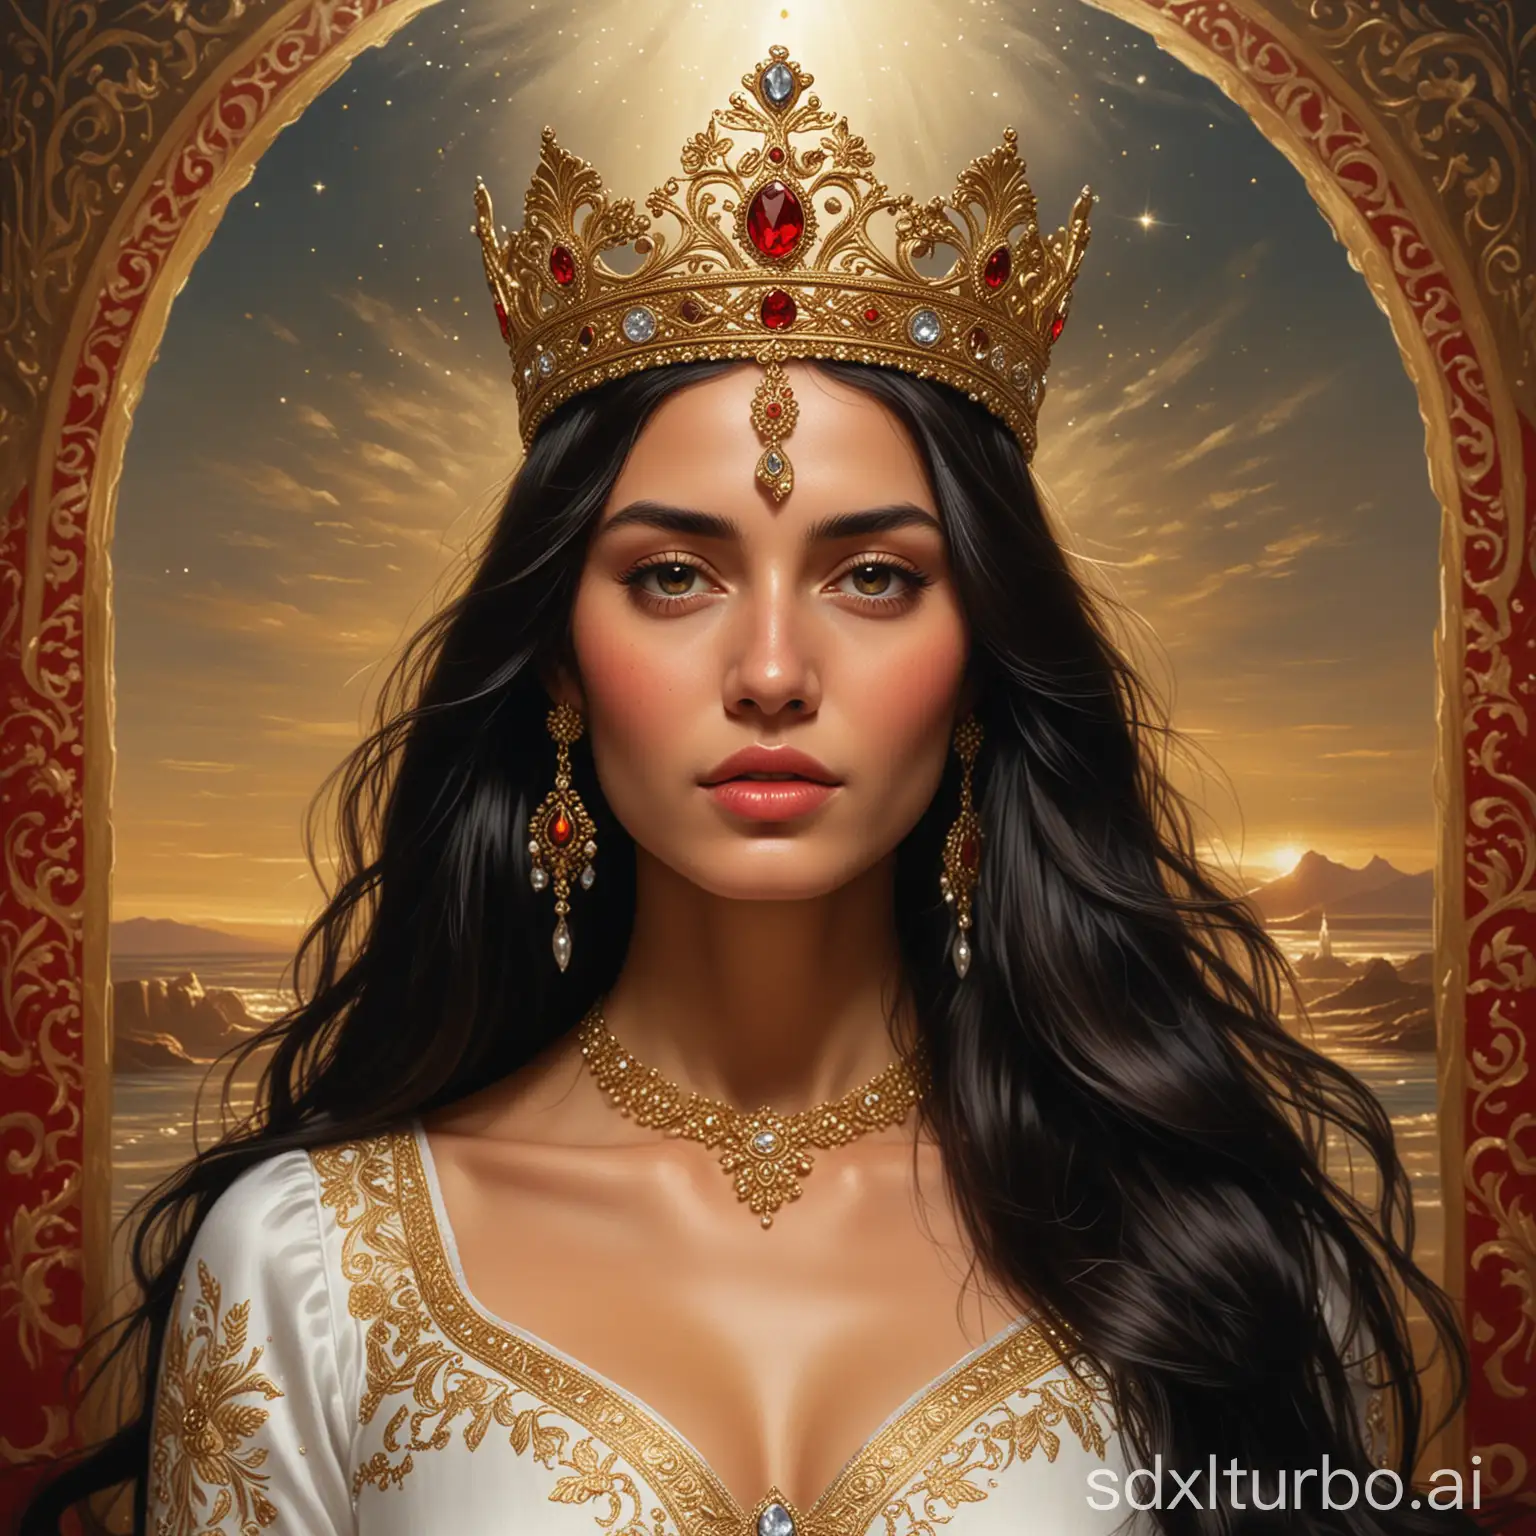 caver in the The image depicts a woman with long, dark hair wearing a gold crown with a large, ornate design. The crown is adorned with a large, sparkling diamond at the top, and the woman is wearing a white dress with gold embroidery. The background is dark and blurred, creating a sense of depth and drawing focus to the woman and her crown.red sea